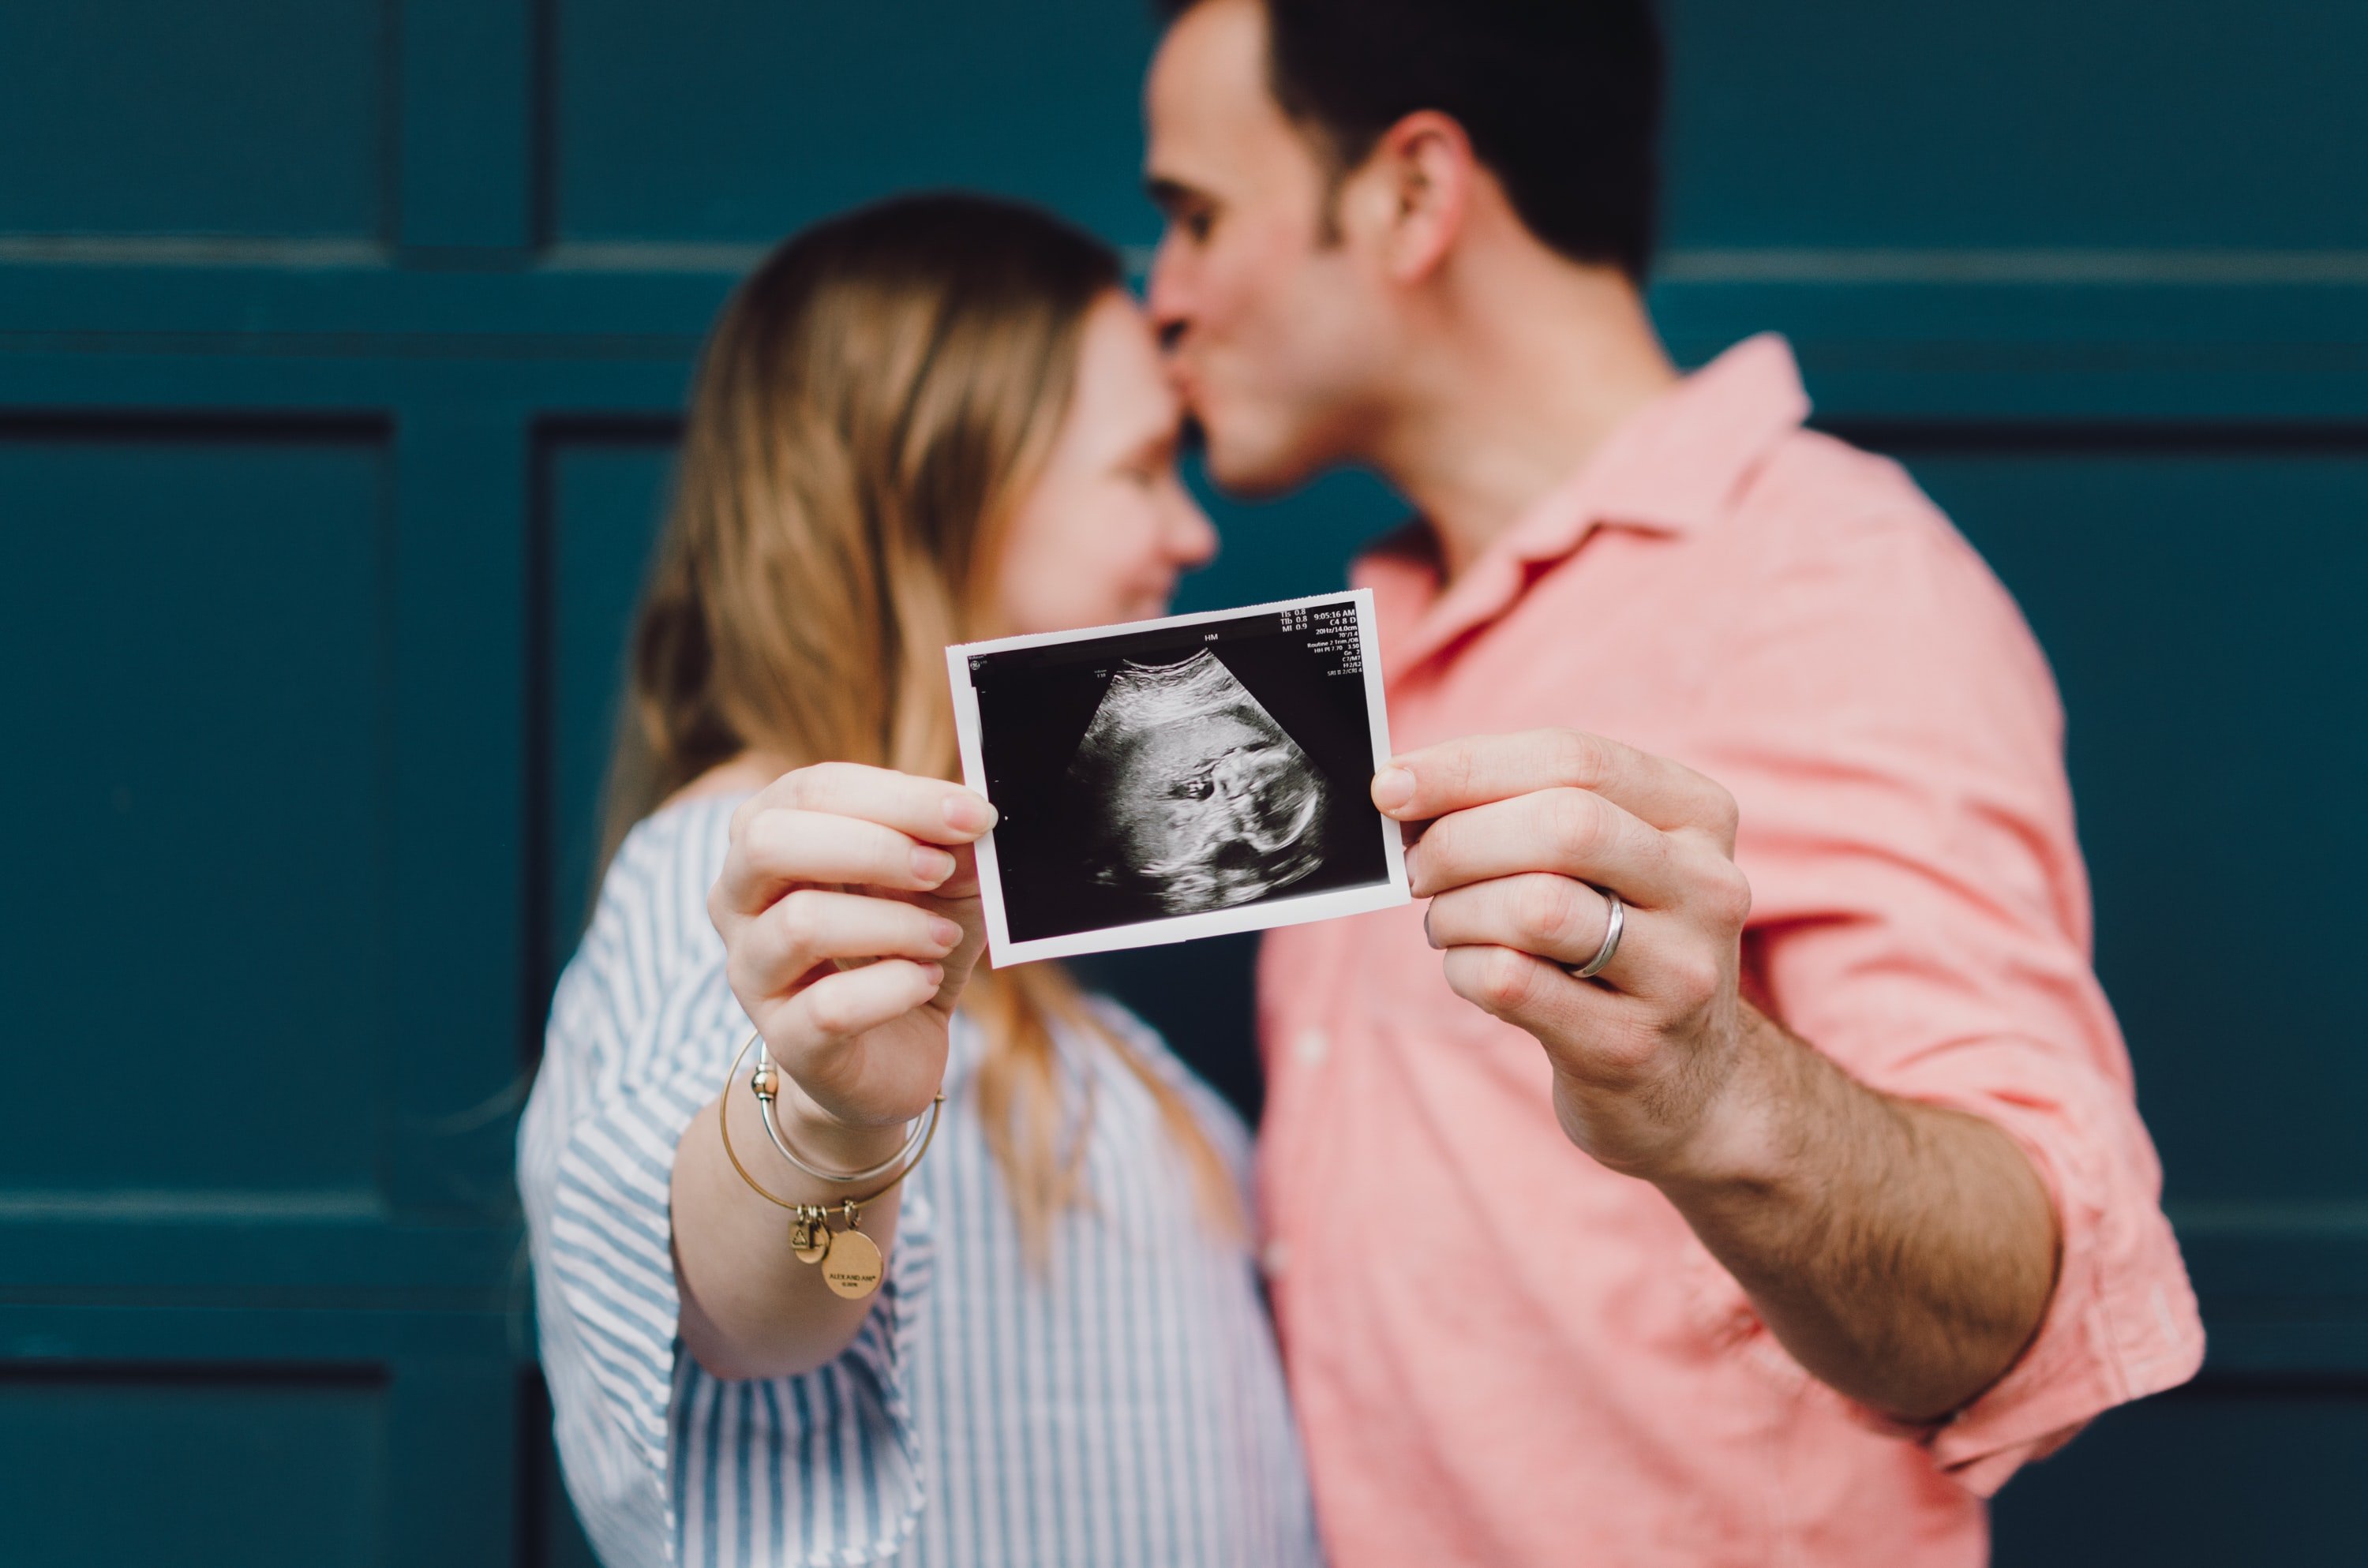 Jennifer revealed she was expecting a child with her boyfriend. | Source: Unsplash